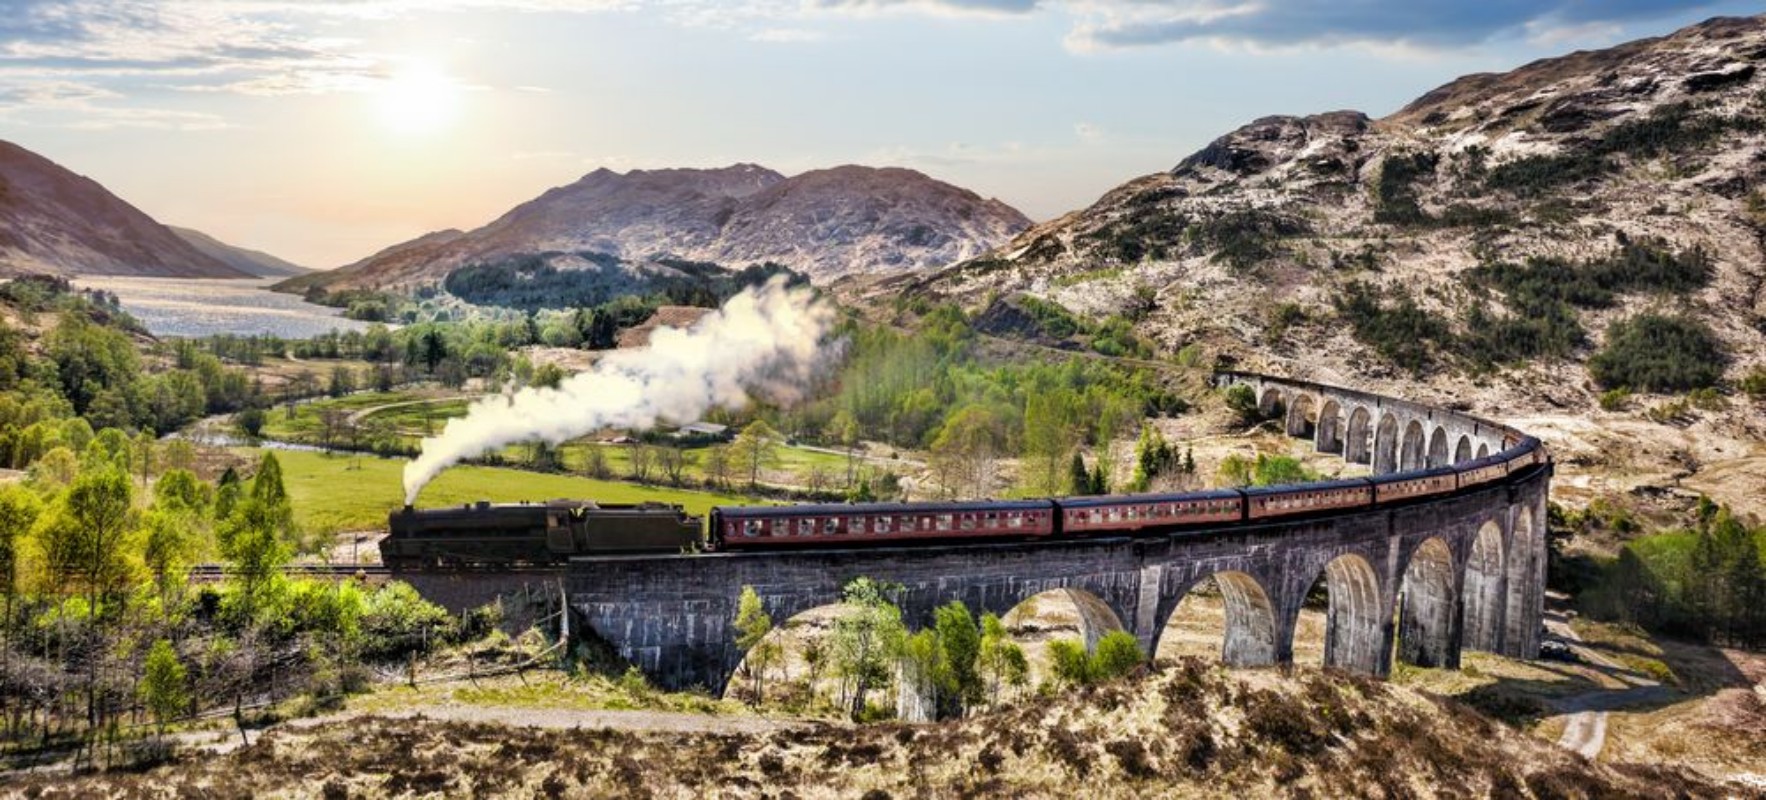 Image de Glenfinnan Railway Viaduct in Scotland with the Jacobite steam train against sunset over lake